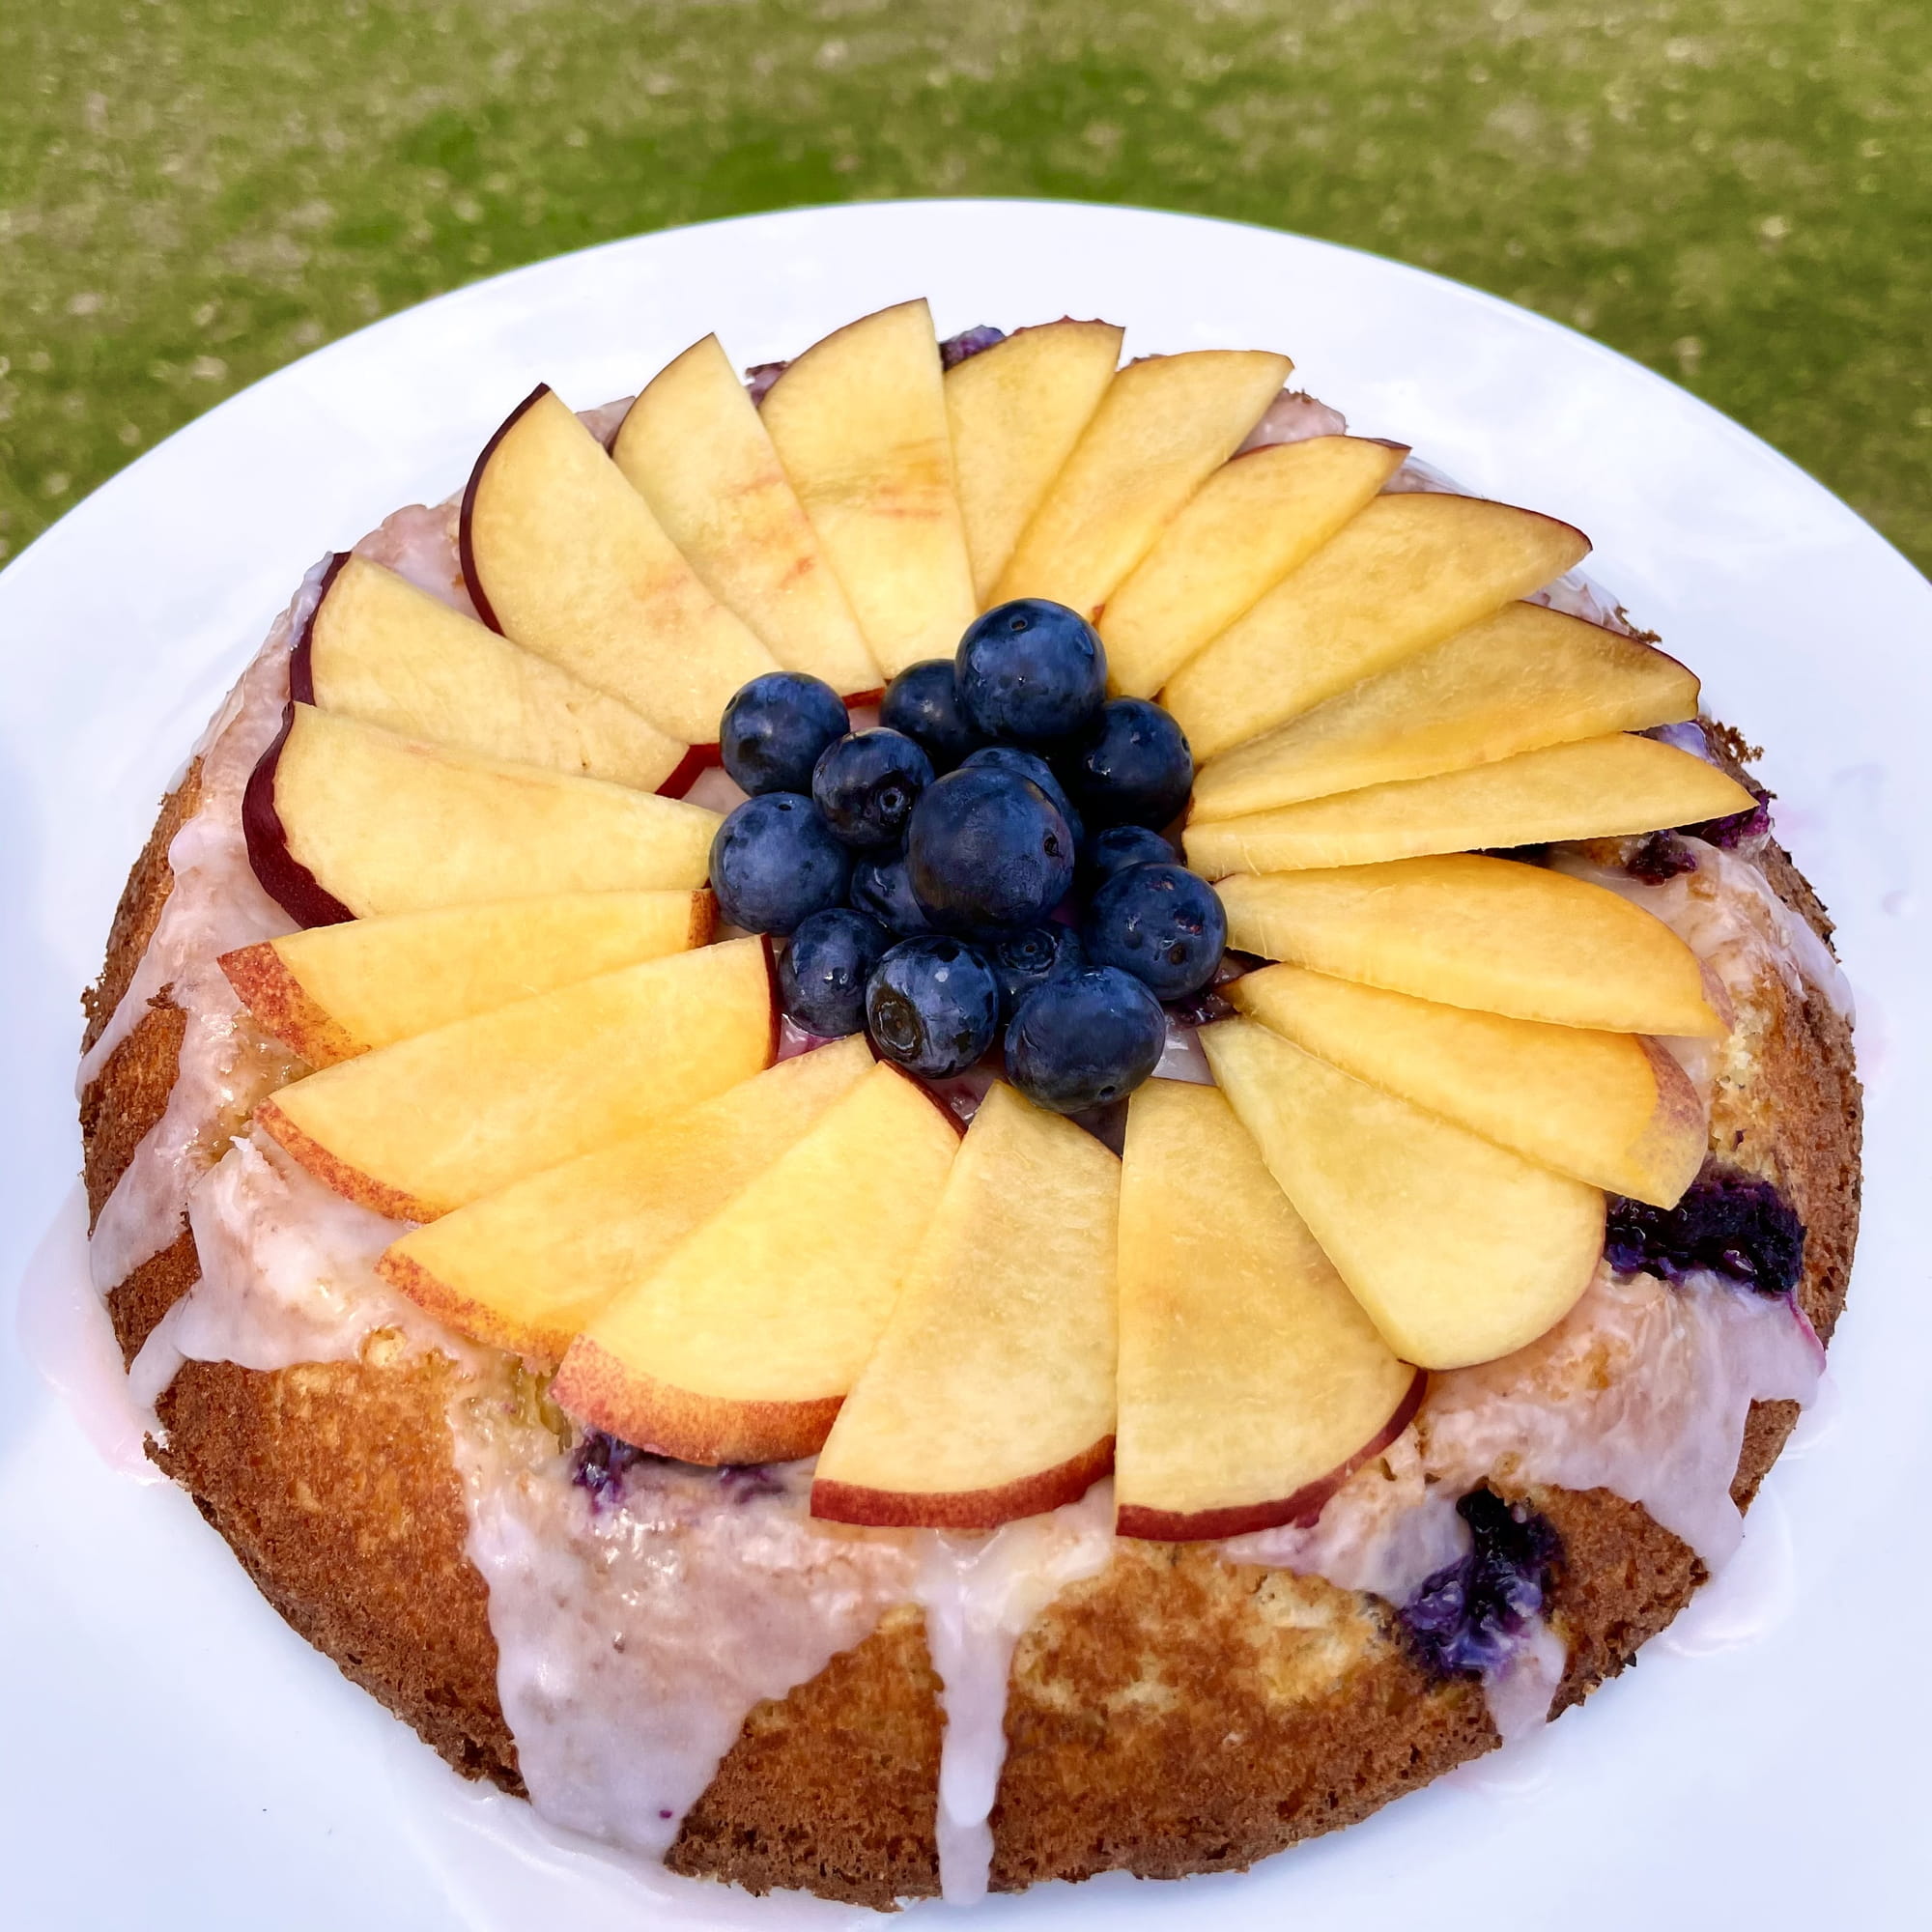 Celebrate summer with our fruity dessert cake